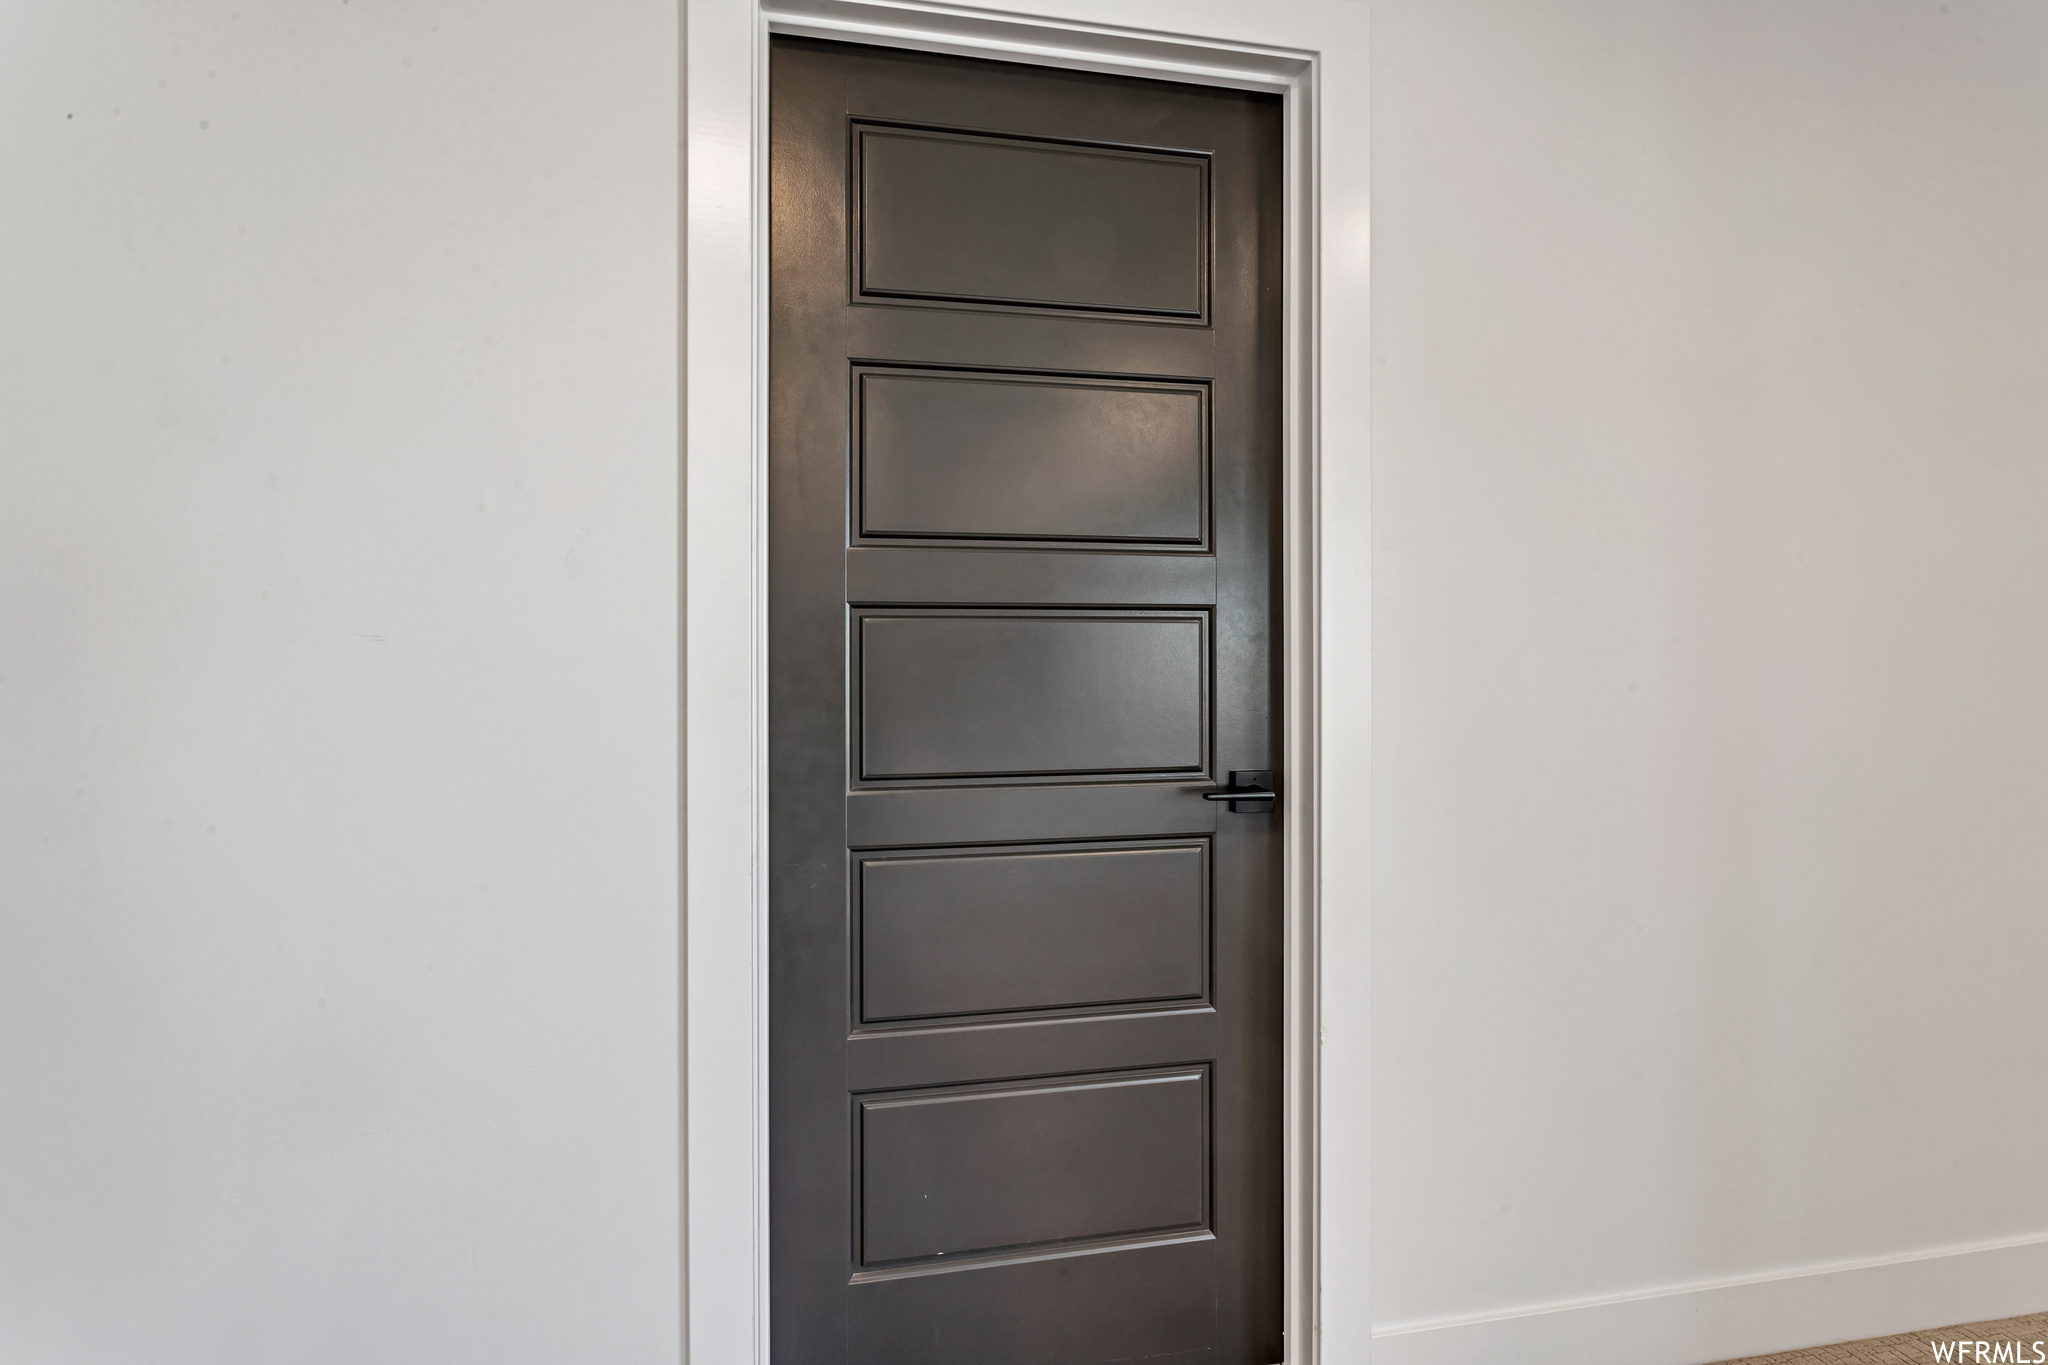 This is a five panel door style, owners can choose from either single, double or five panel doors